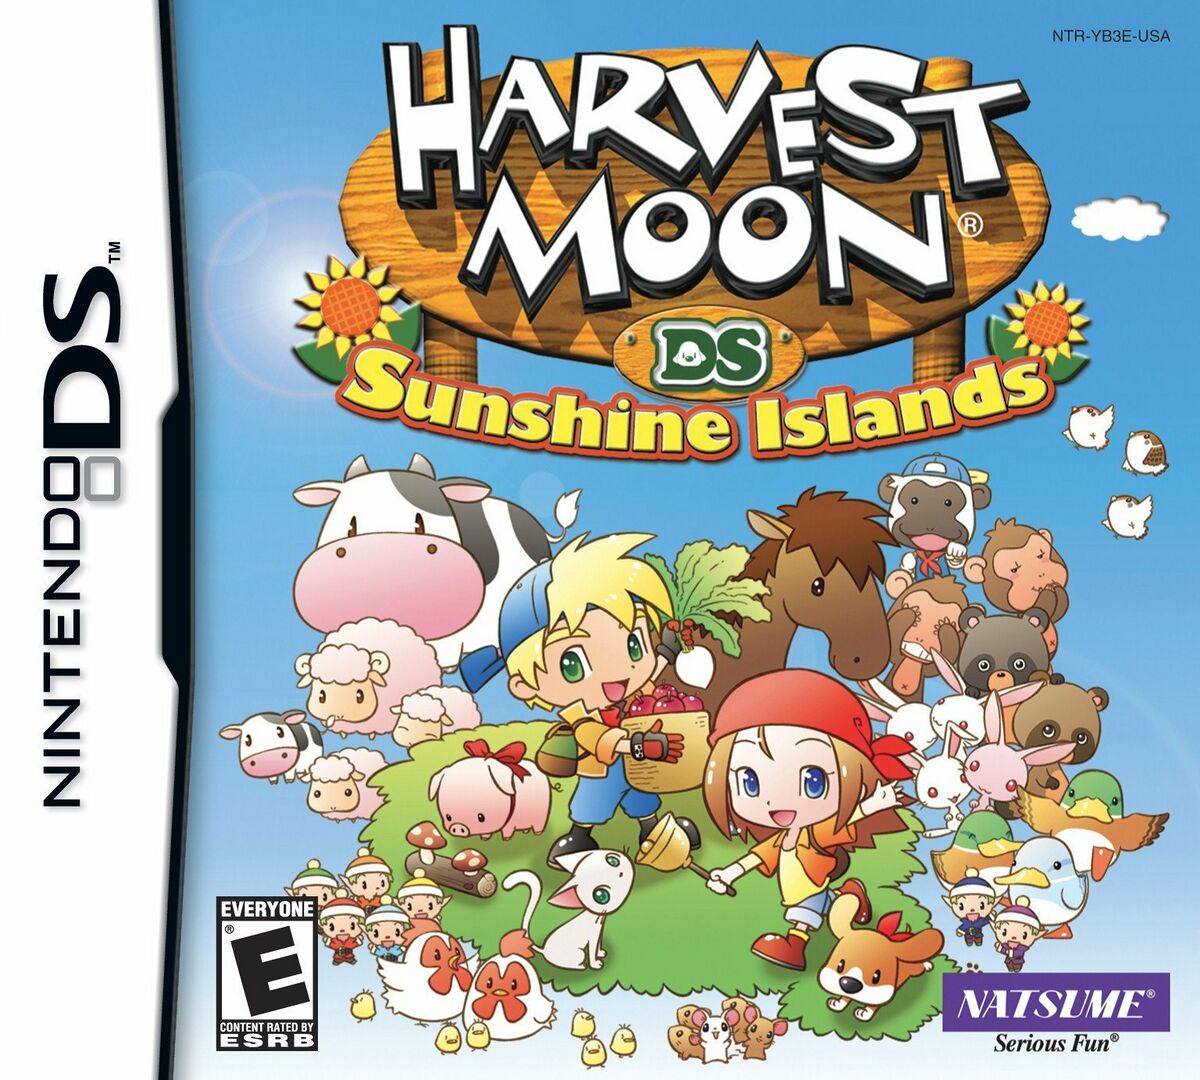 Harvest Moon DS: Sunshine Islands — StrategyWiki | Strategy guide and